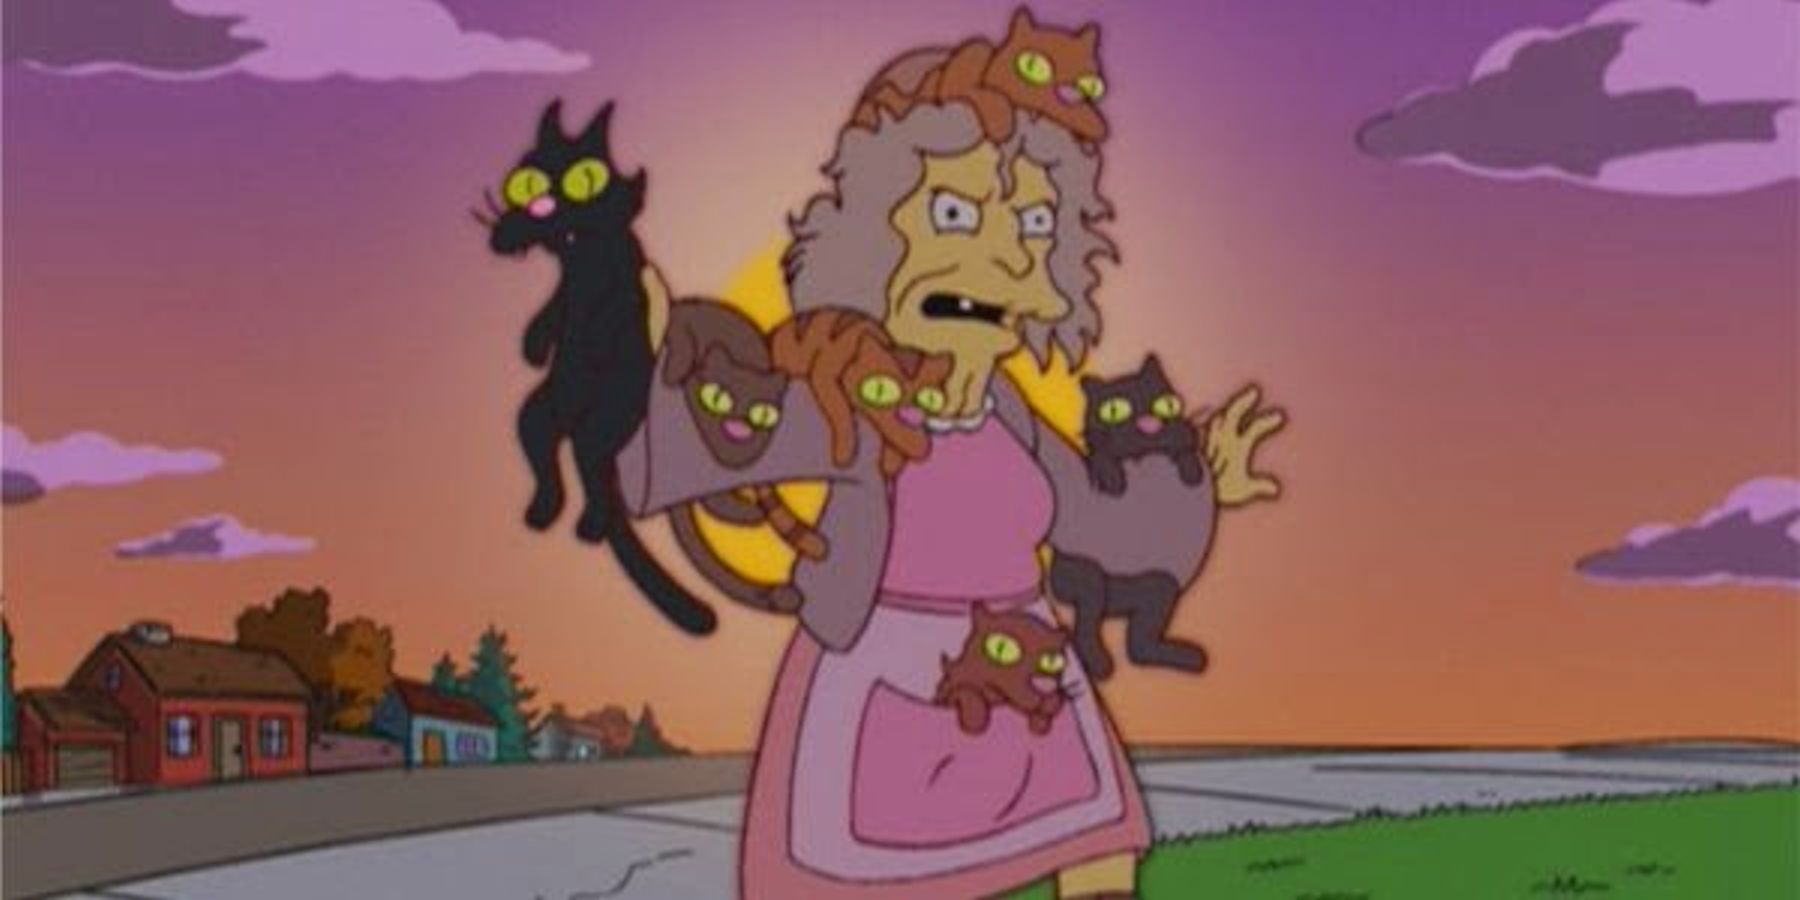 The Crazy Cat Lady